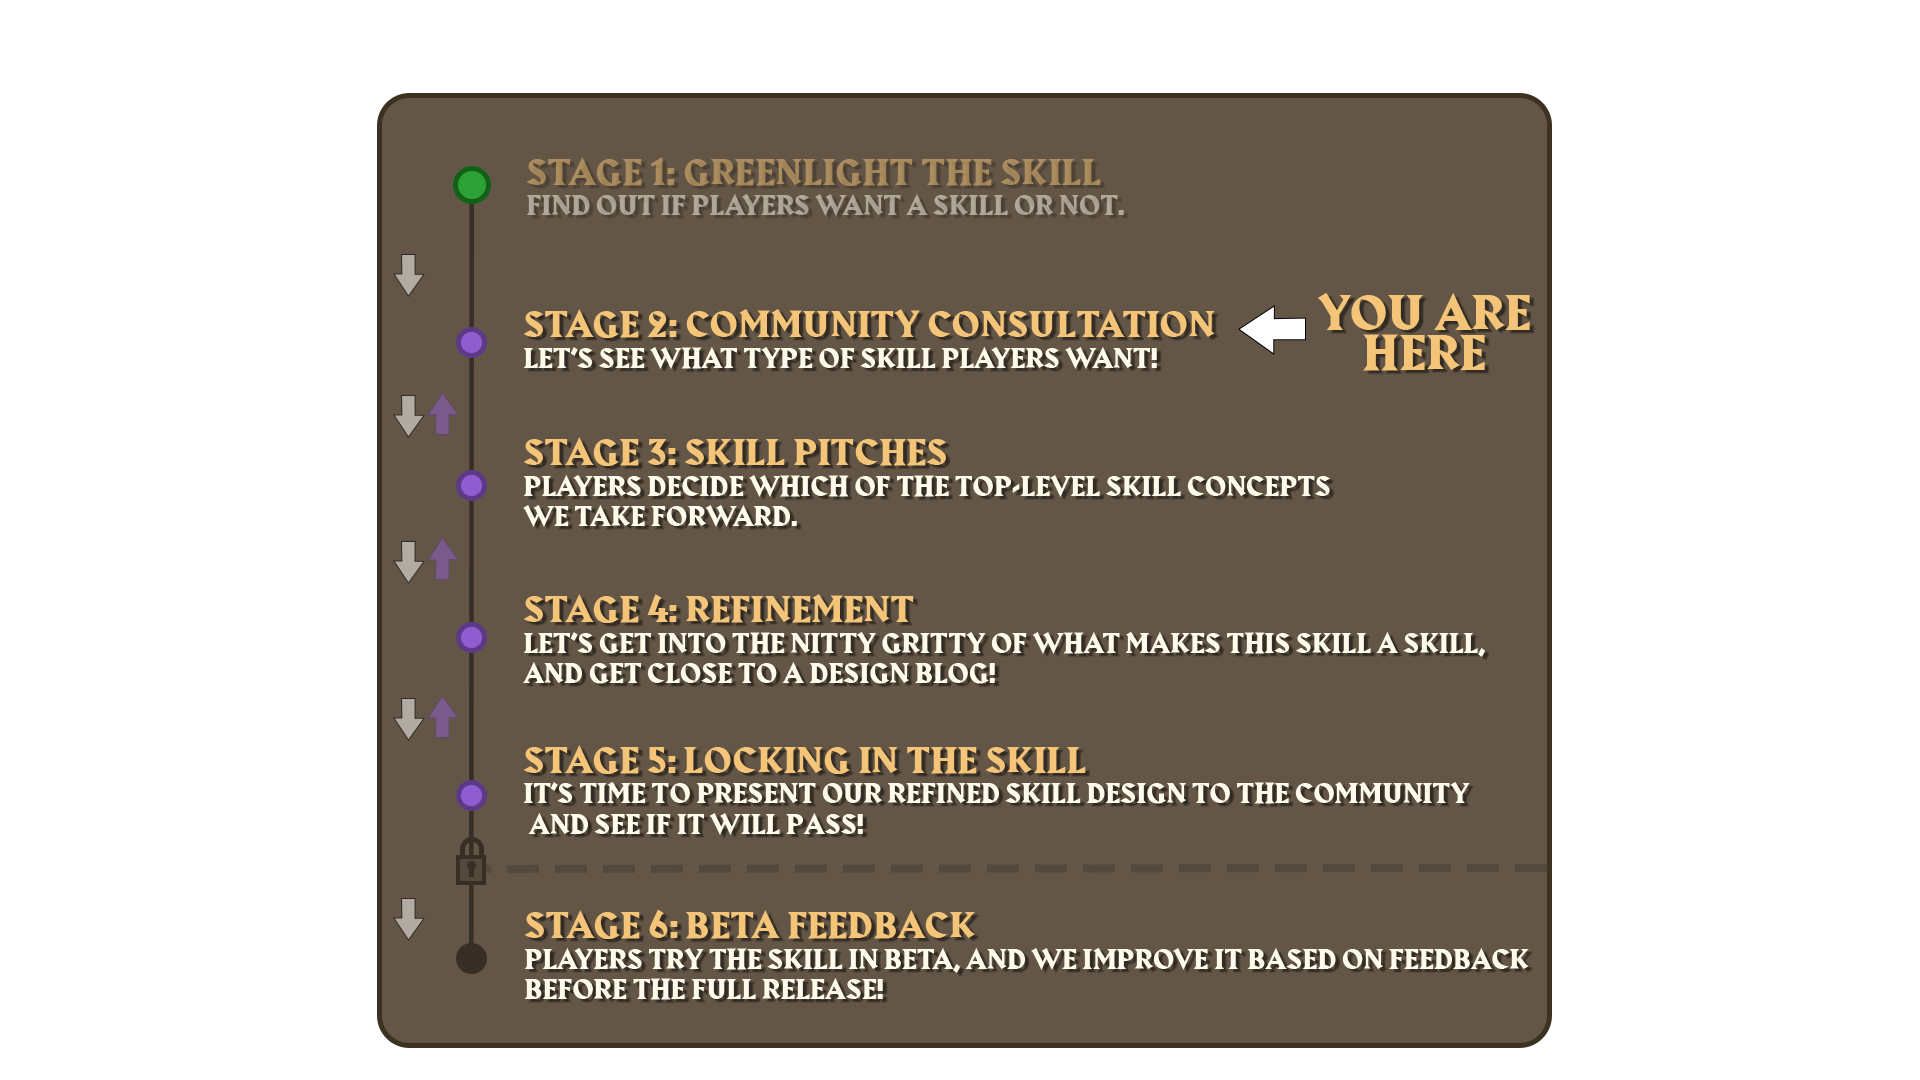 Should you play OSRS in 2023 (Old School Runescape) - Loot and Level